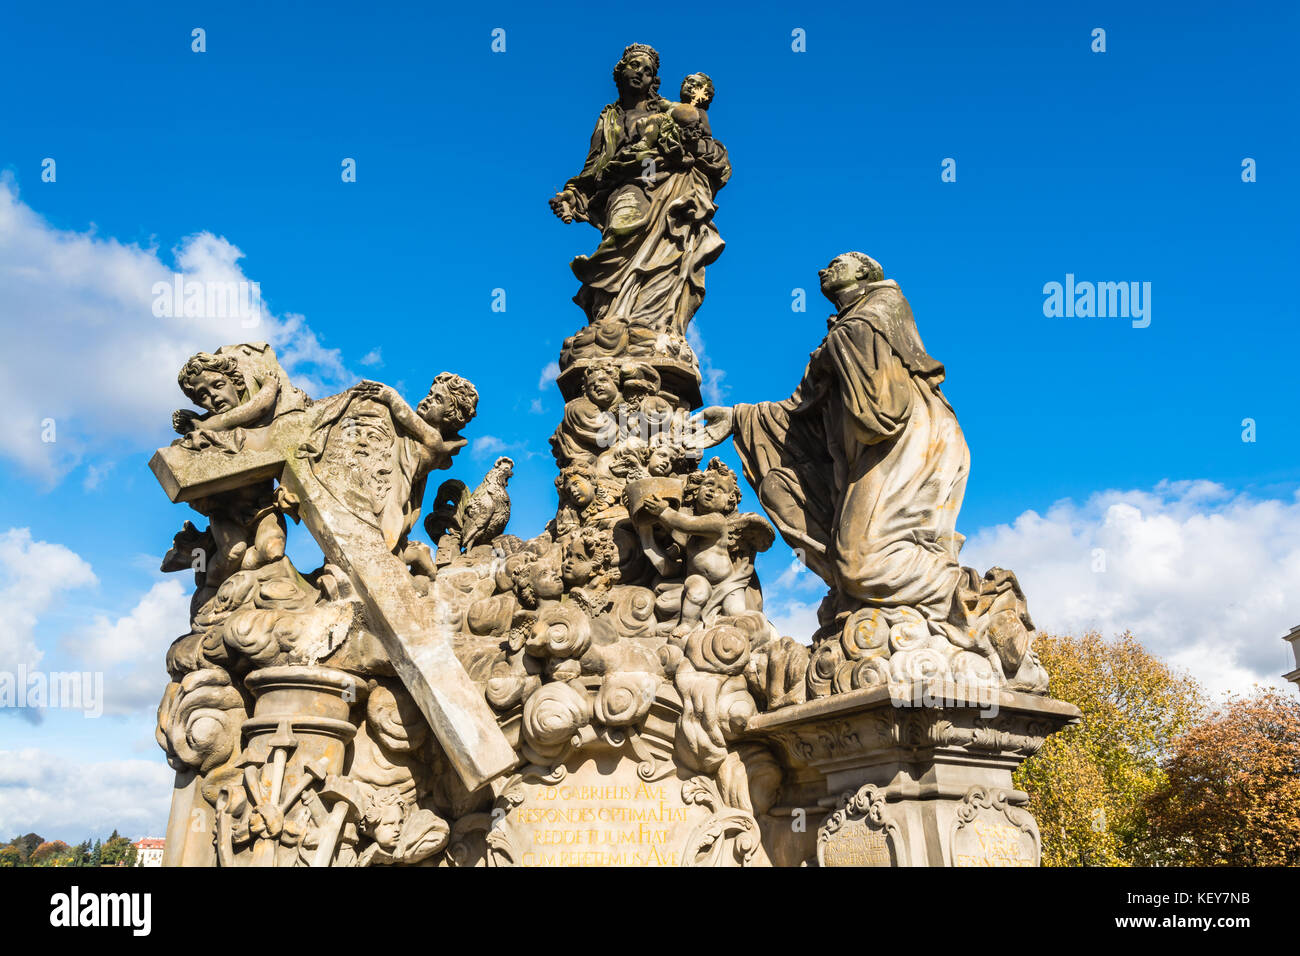 Prague, Czech Republic: Statues of Madonna and Saint Bernard, outdoor sculptures by Matej Vaclav Jackel on the north side of Charles Bridge over the r Stock Photo